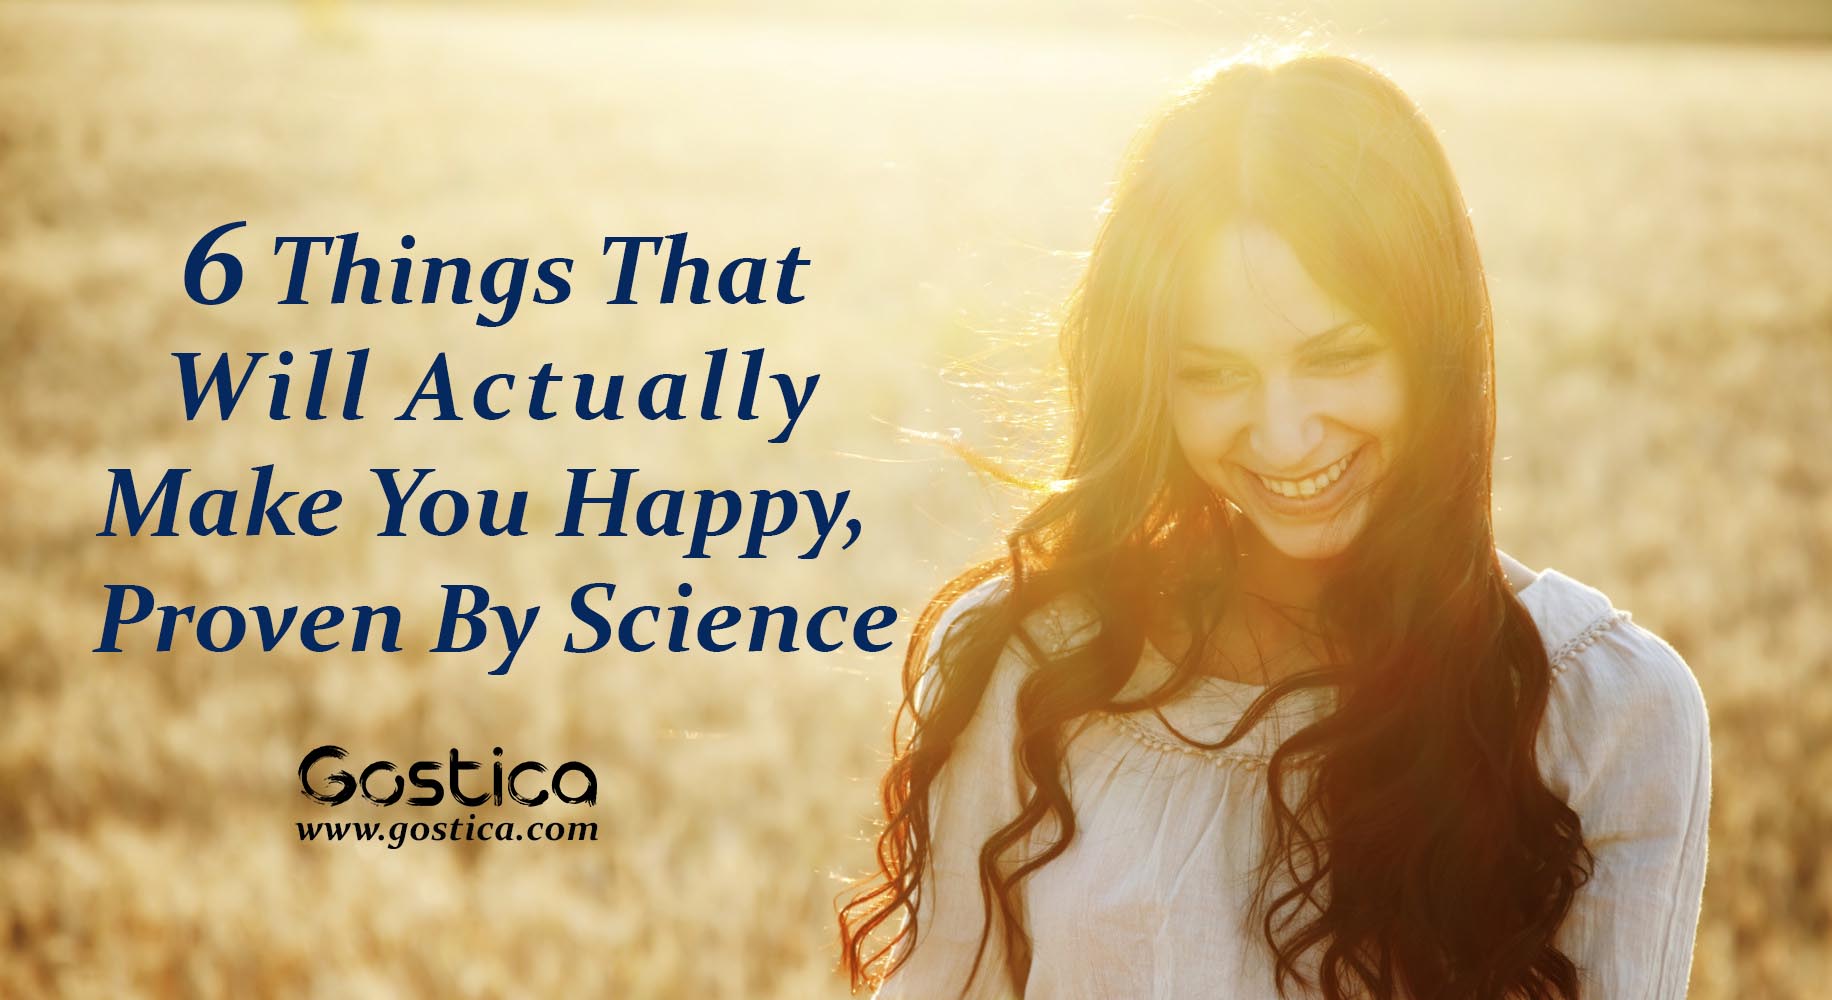 6 Things That Will Actually Make You Happy, Proven By Science - 1832 x 1000 jpeg 157kB